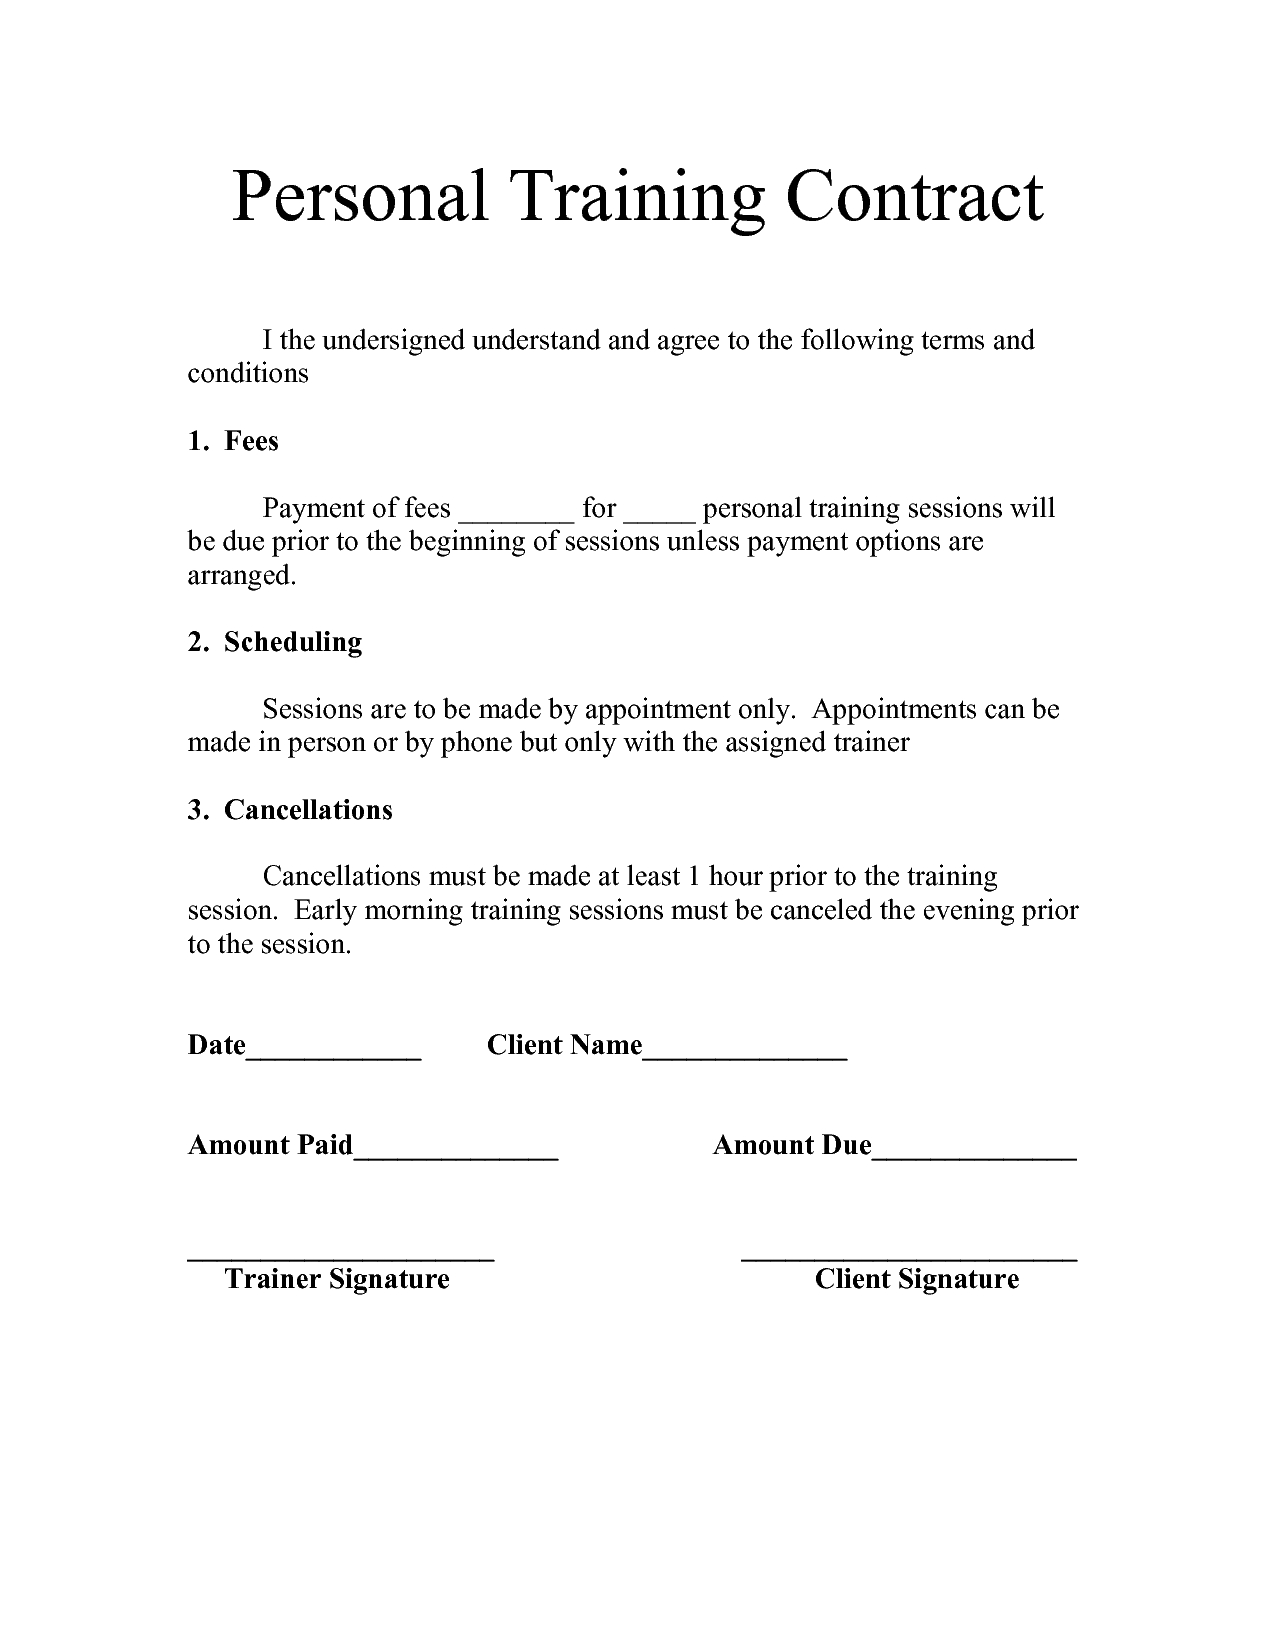 Personal Agreement Template 003 Personal Training Contracts Template Top Ideas Trainer Client